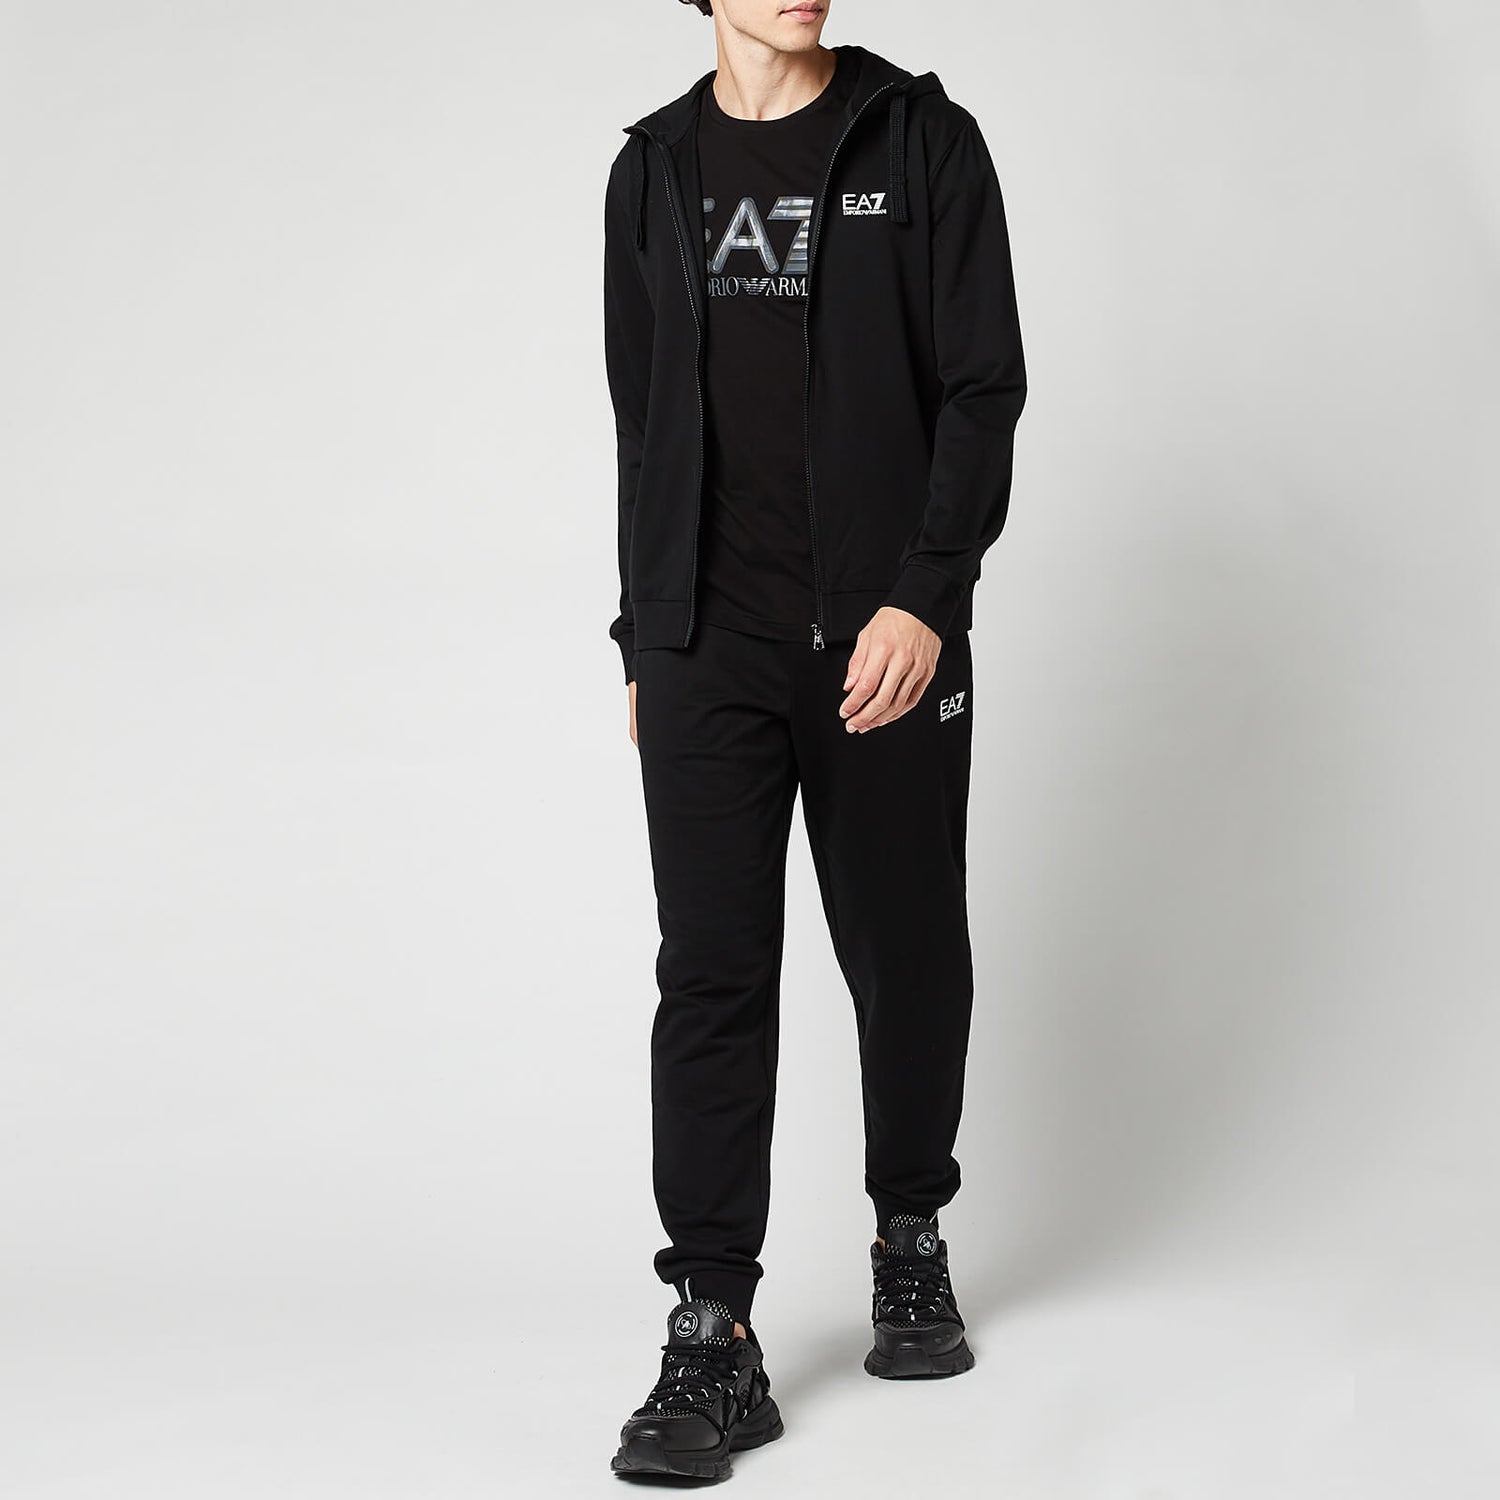 EA7 Men's Core Identity French Terry Hooded Tracksuit - Black - L